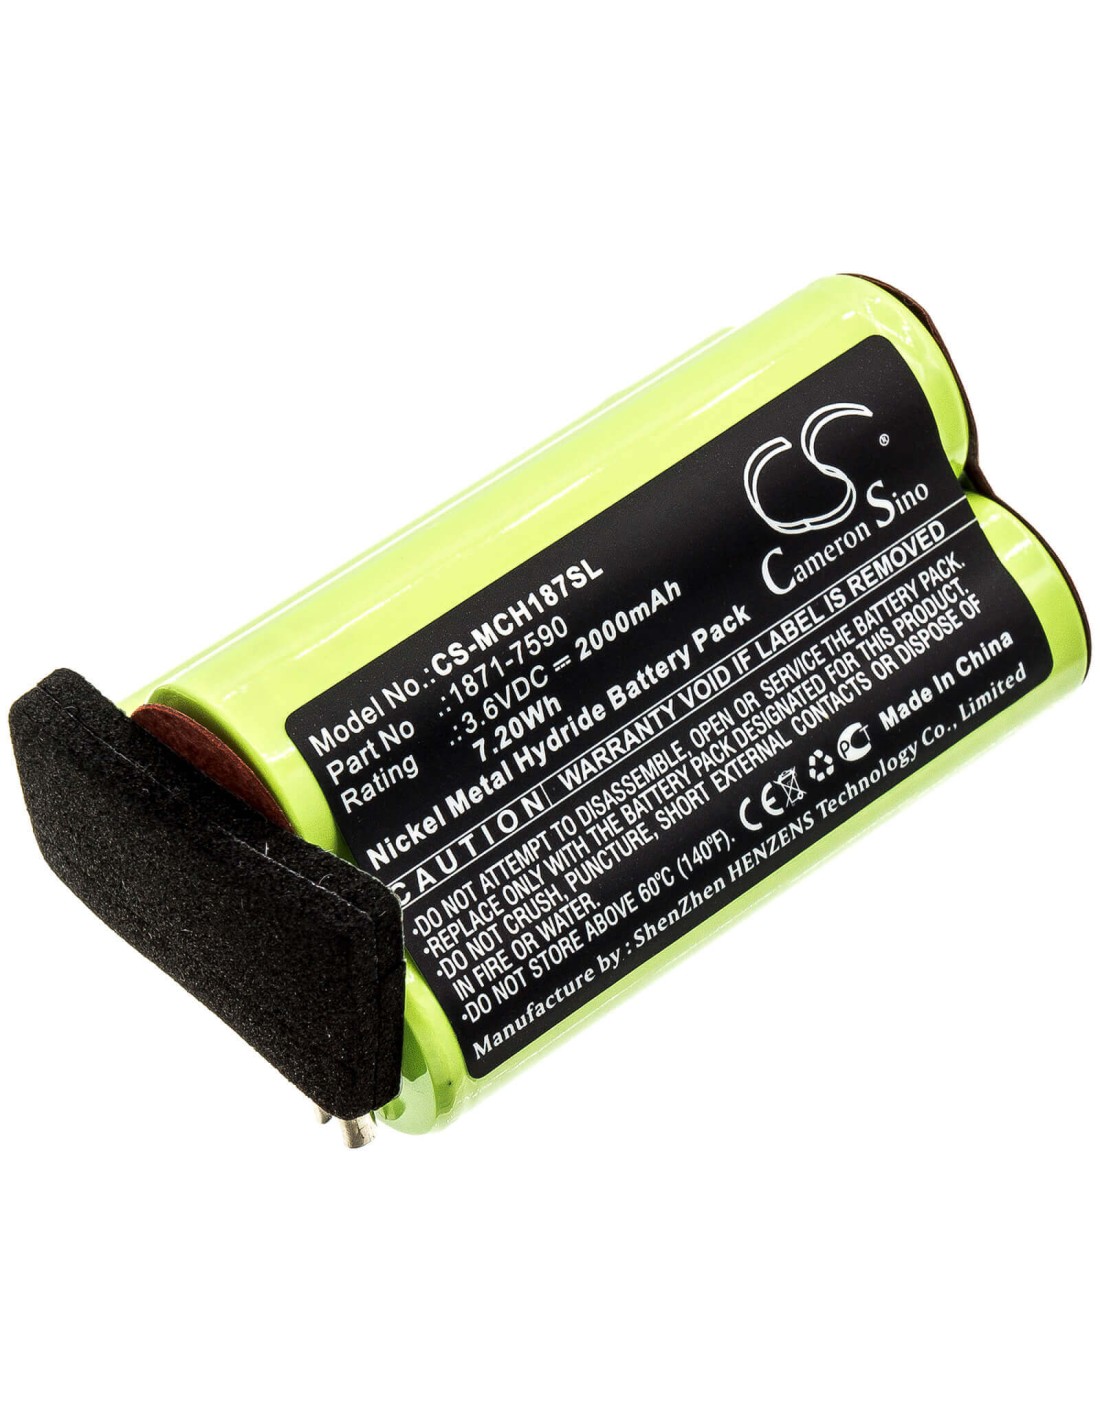 Battery for Moser, Chromstyle 1871, Super Cordless 1872 Clipper, Wella Academy Chromstyle 3.6V, 2000mAh - 7.20Wh